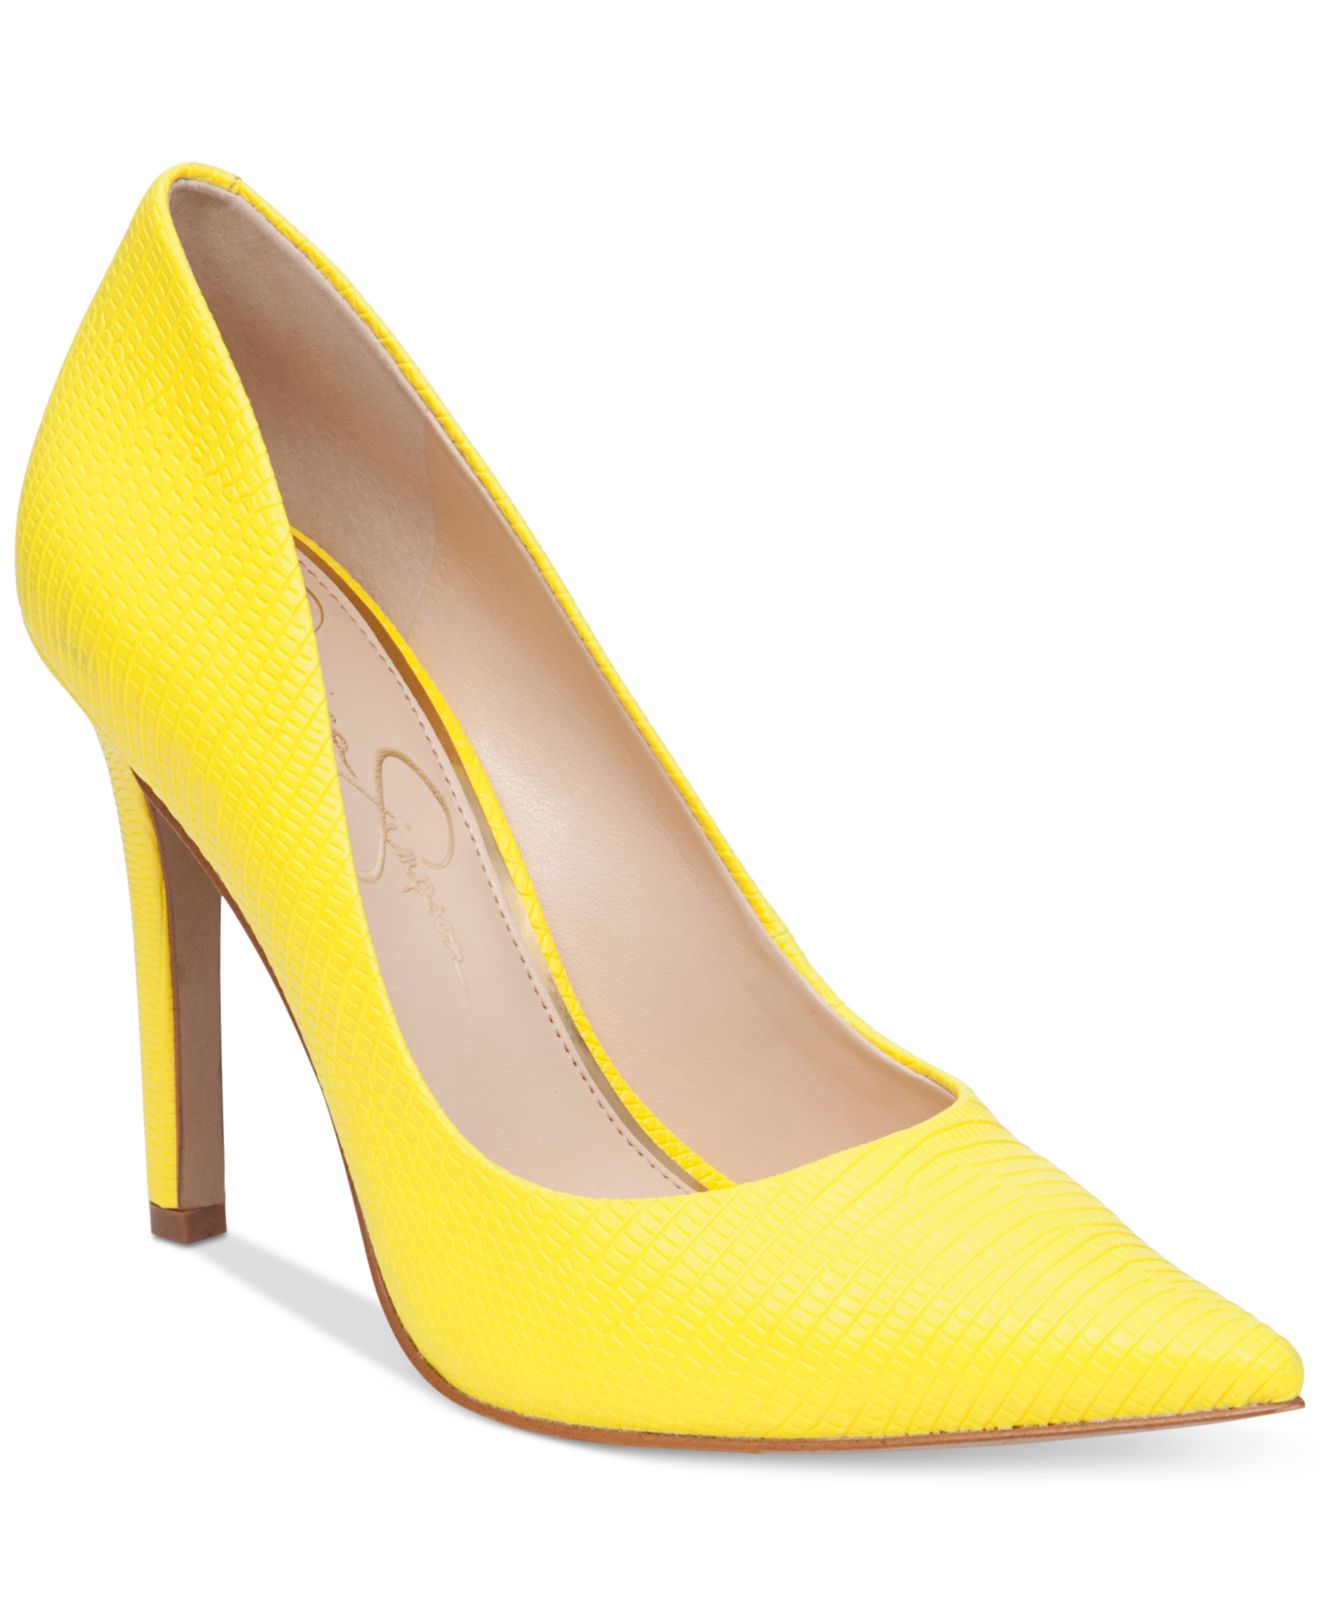 Jessica Simpson Cassani Pumps in Yellow | Lyst